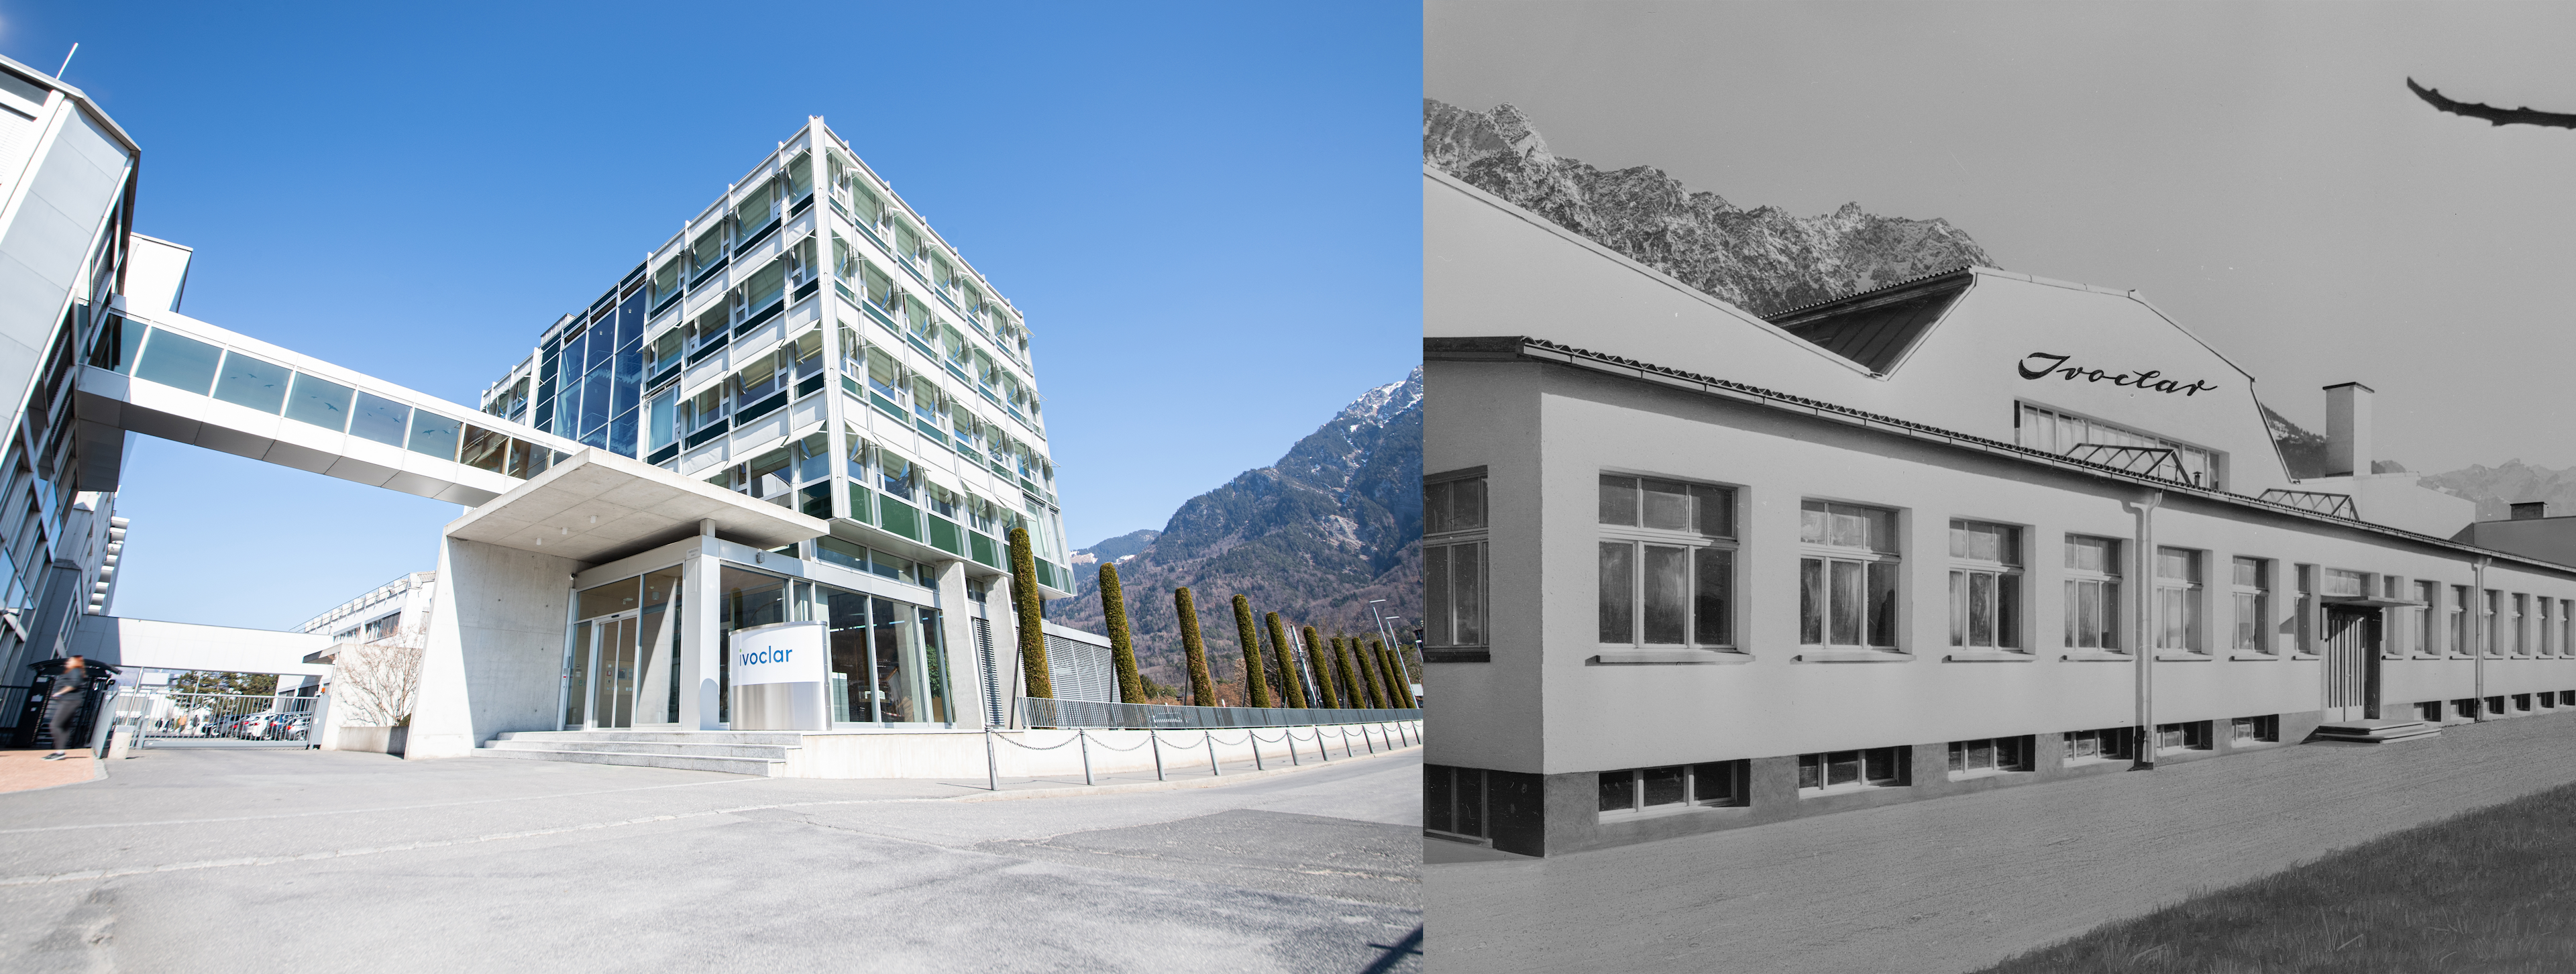 Ivoclar's headquarters have been located in Liechtenstein since 1933. A present-day scene is pictured on the left and one from the company's archives is on the right.